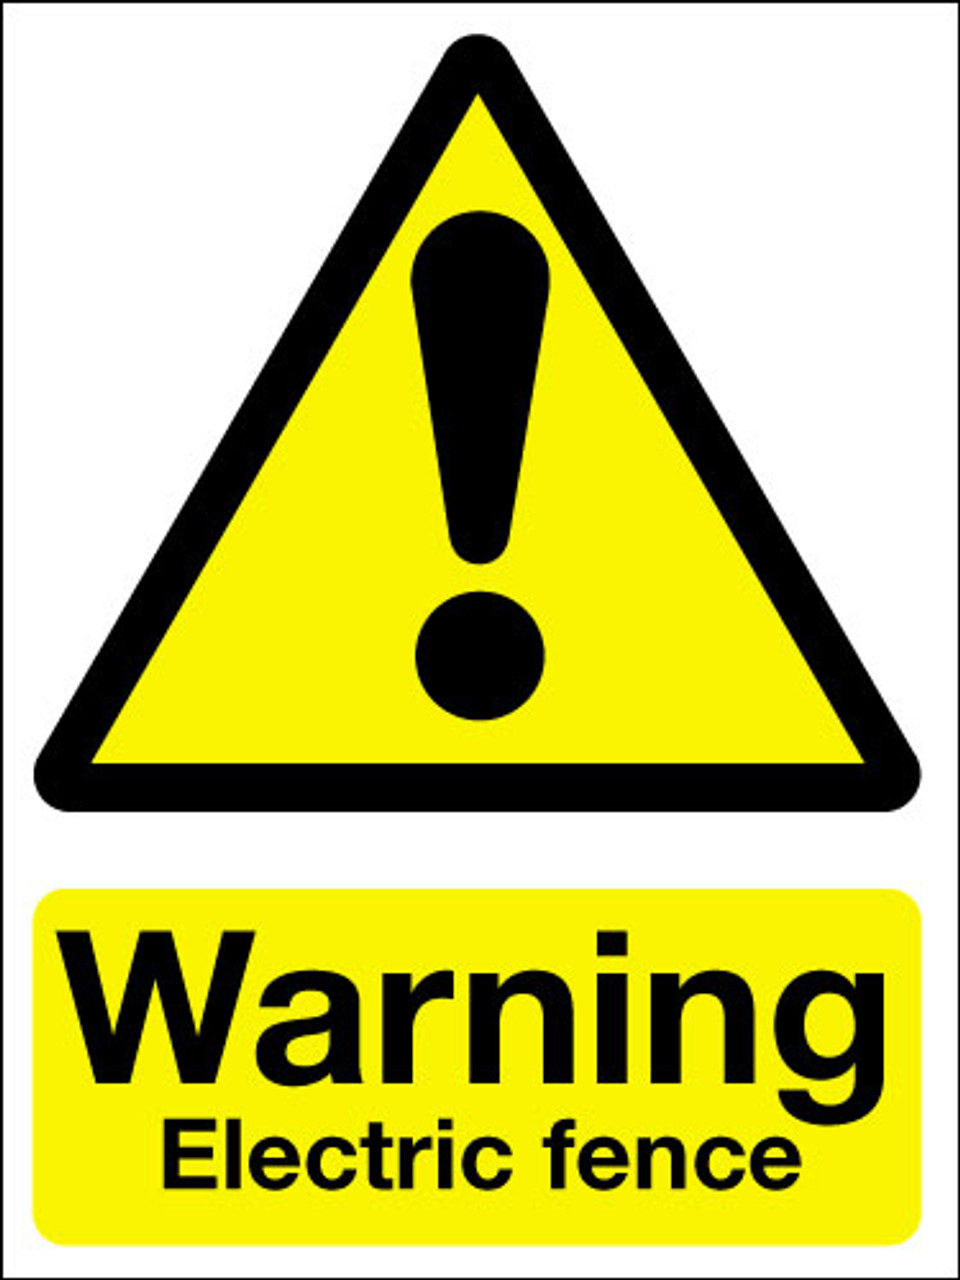 Warning electric fence sign